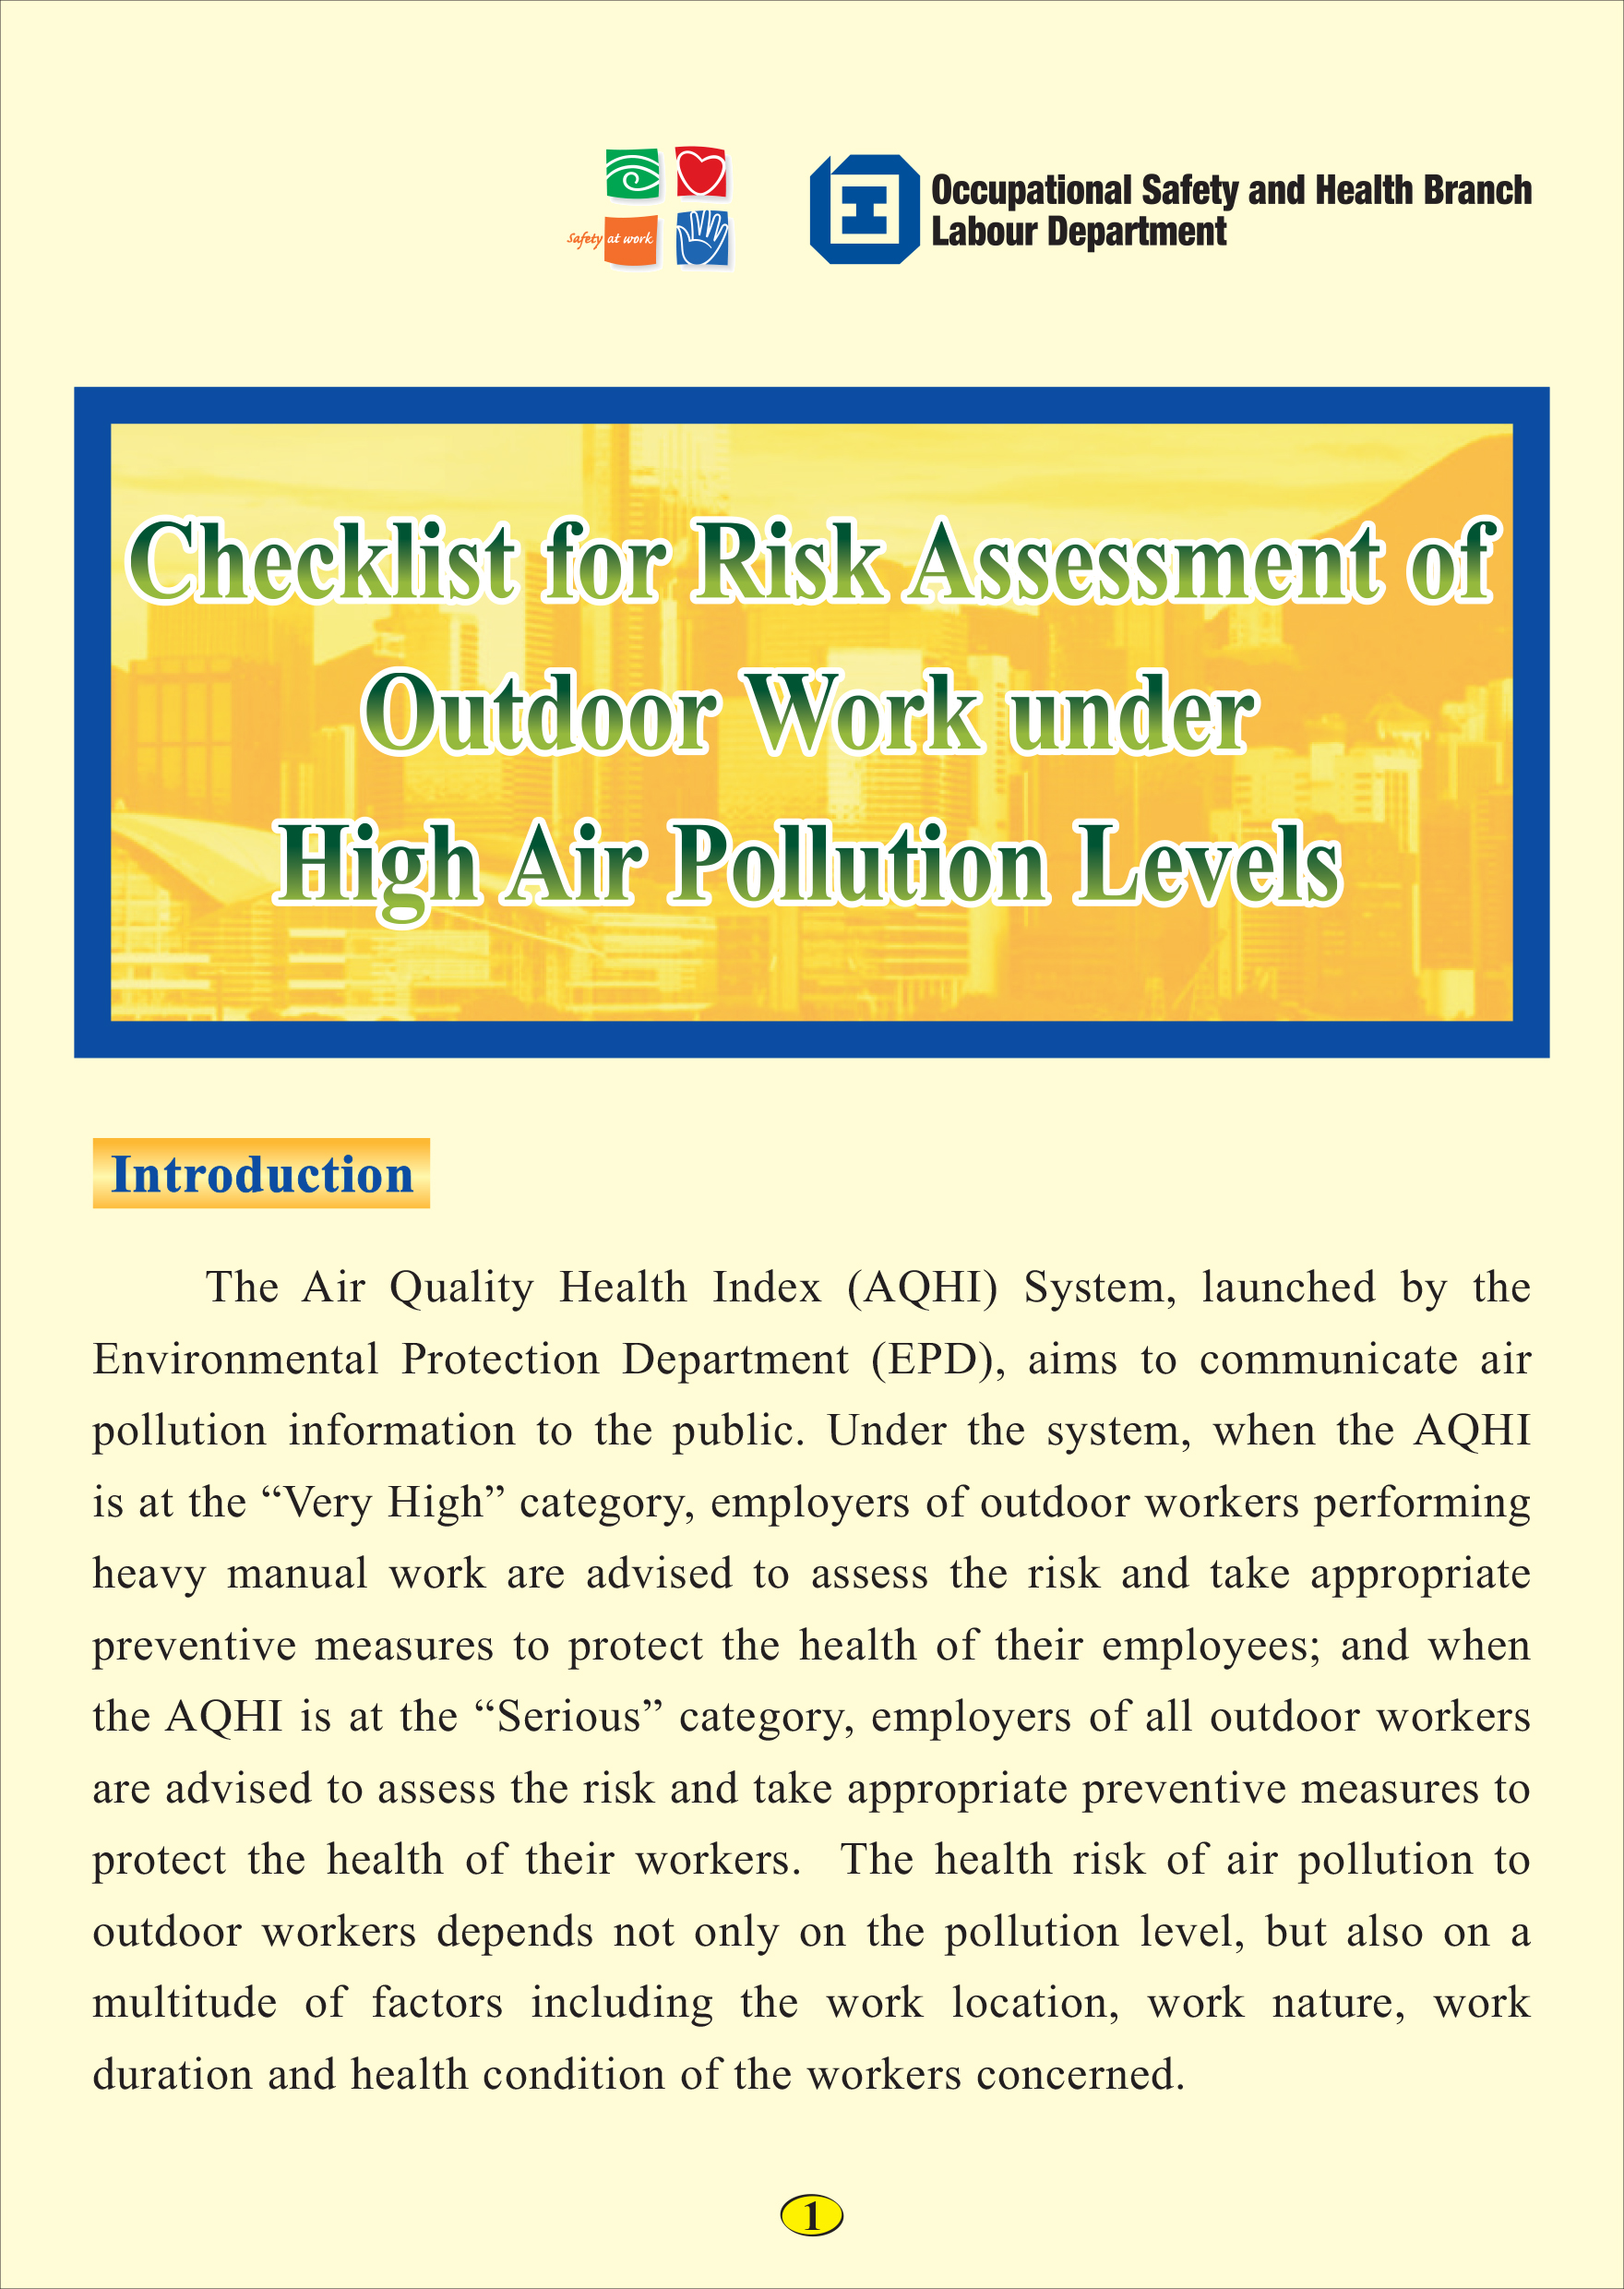 Checklist for Risk Assessment of Outdoor Work under High Air Pollution Levels (published by the Labour Department)